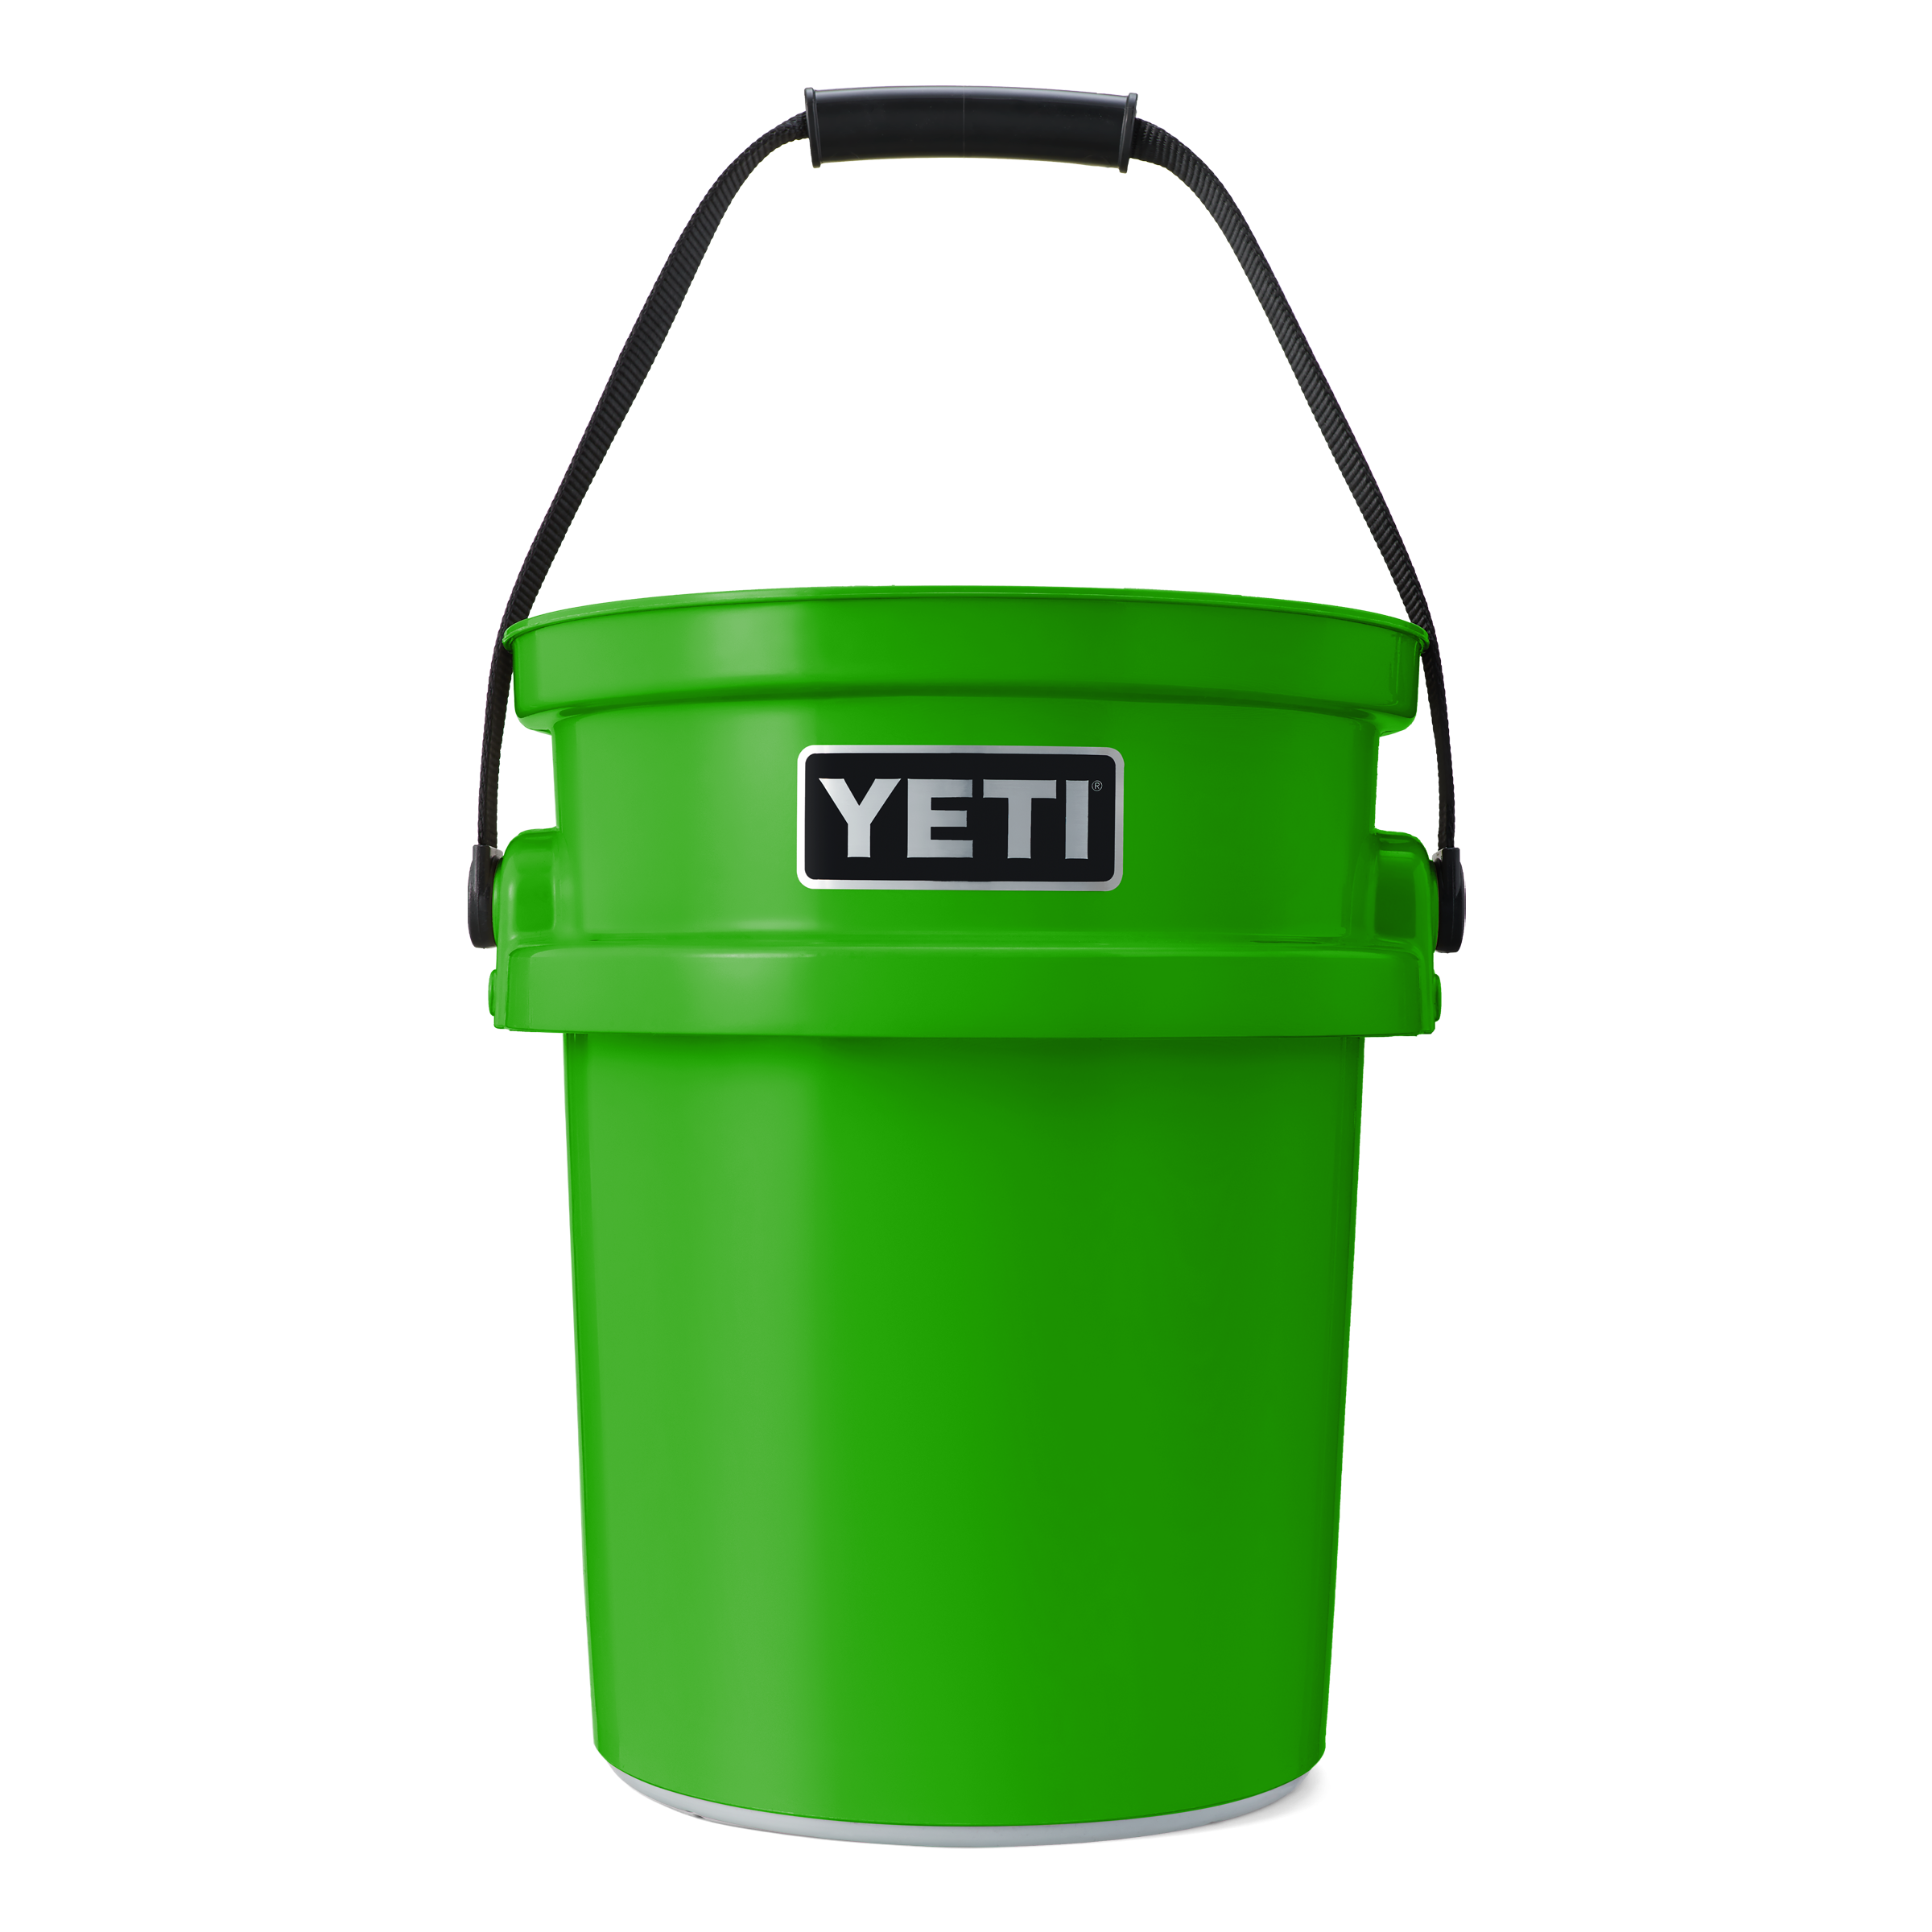 https://cdn.shopify.com/s/files/1/0094/1912/8929/products/220078_1H23_Color_site_studio_Loadout_Bucket_Canopy_Front_3622_Primary_B_2400x2400_11f692f0-e703-4d2f-817d-4d1942f9c81b.png?v=1676908435